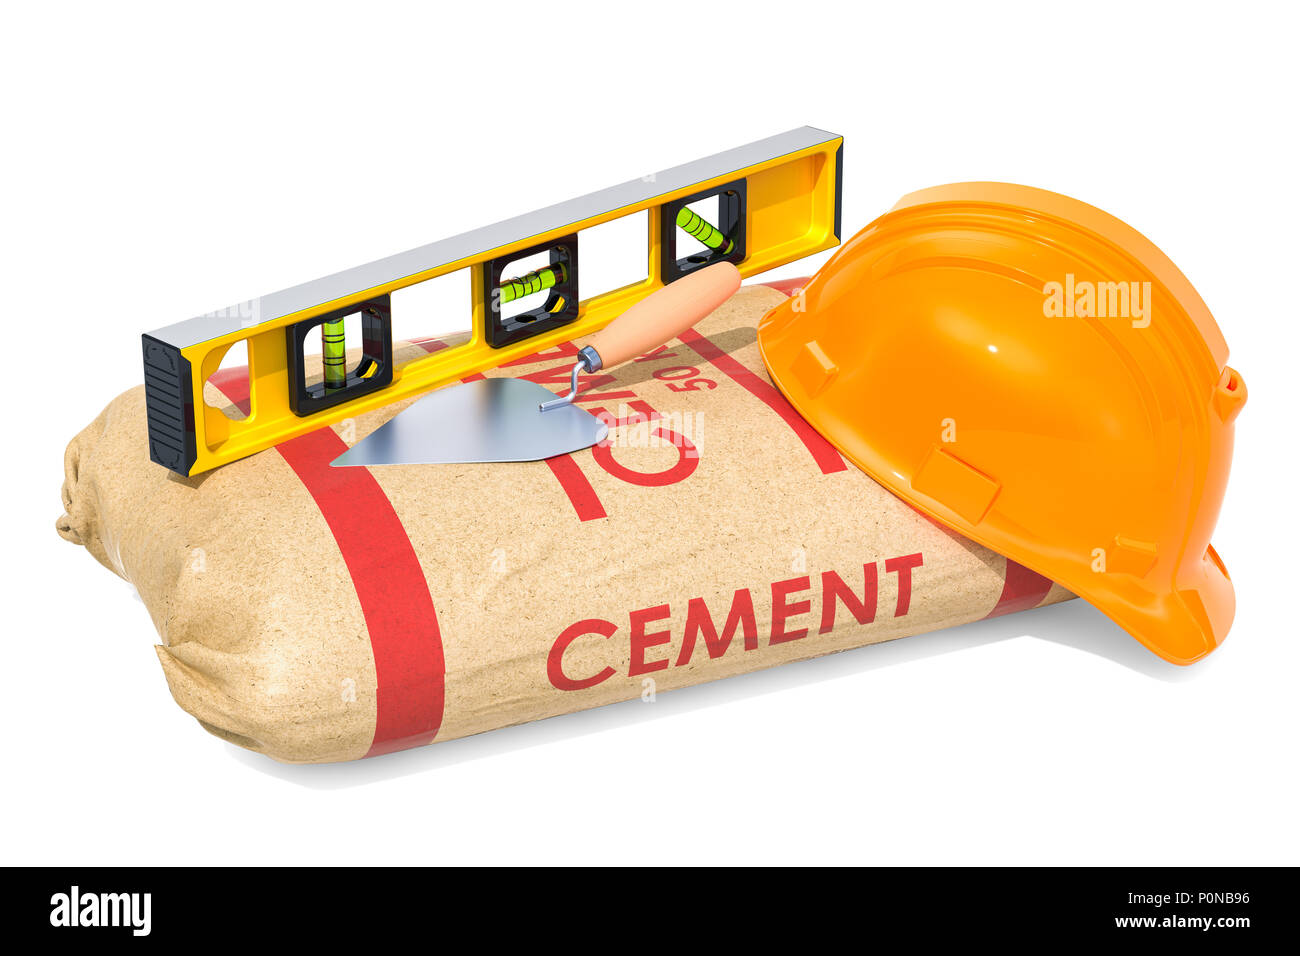 Construction concept. Cement sack with masonry trowel and spirit level, 3D rendering isolated on white background Stock Photo